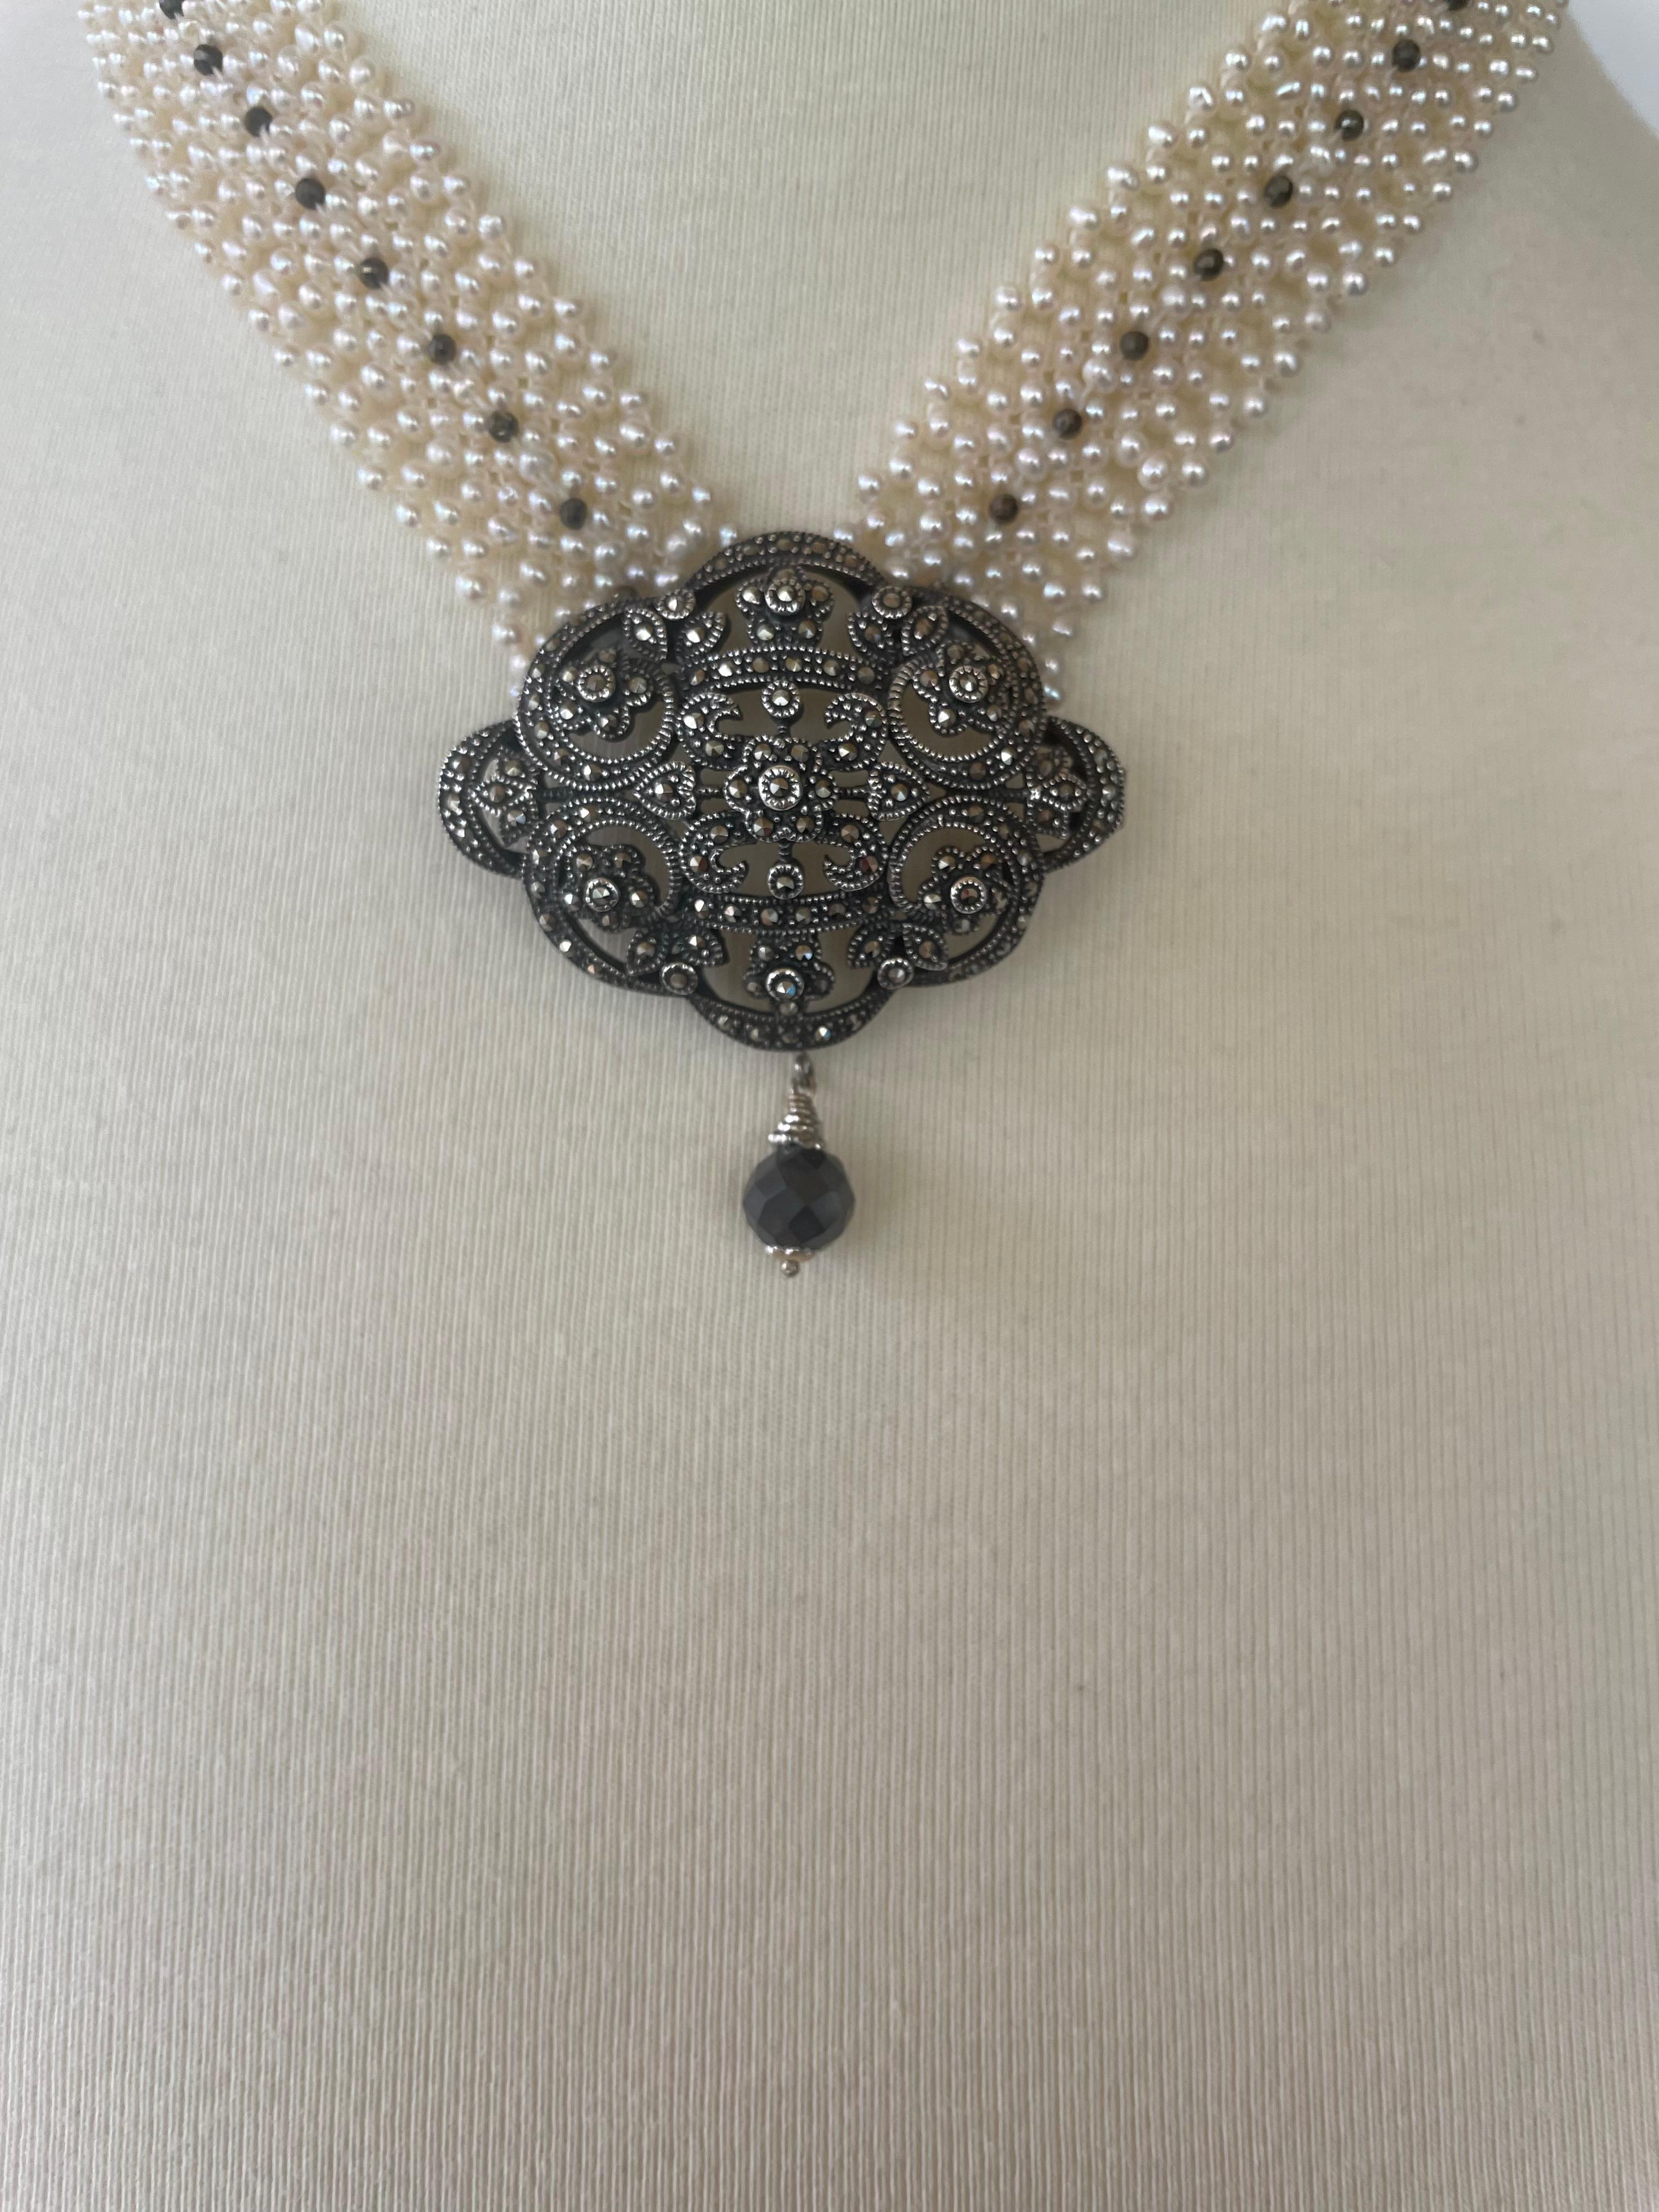 Marina J. Woven Pearl Necklace with Vintage Silver Centerpiece and Black Spinnel For Sale 3